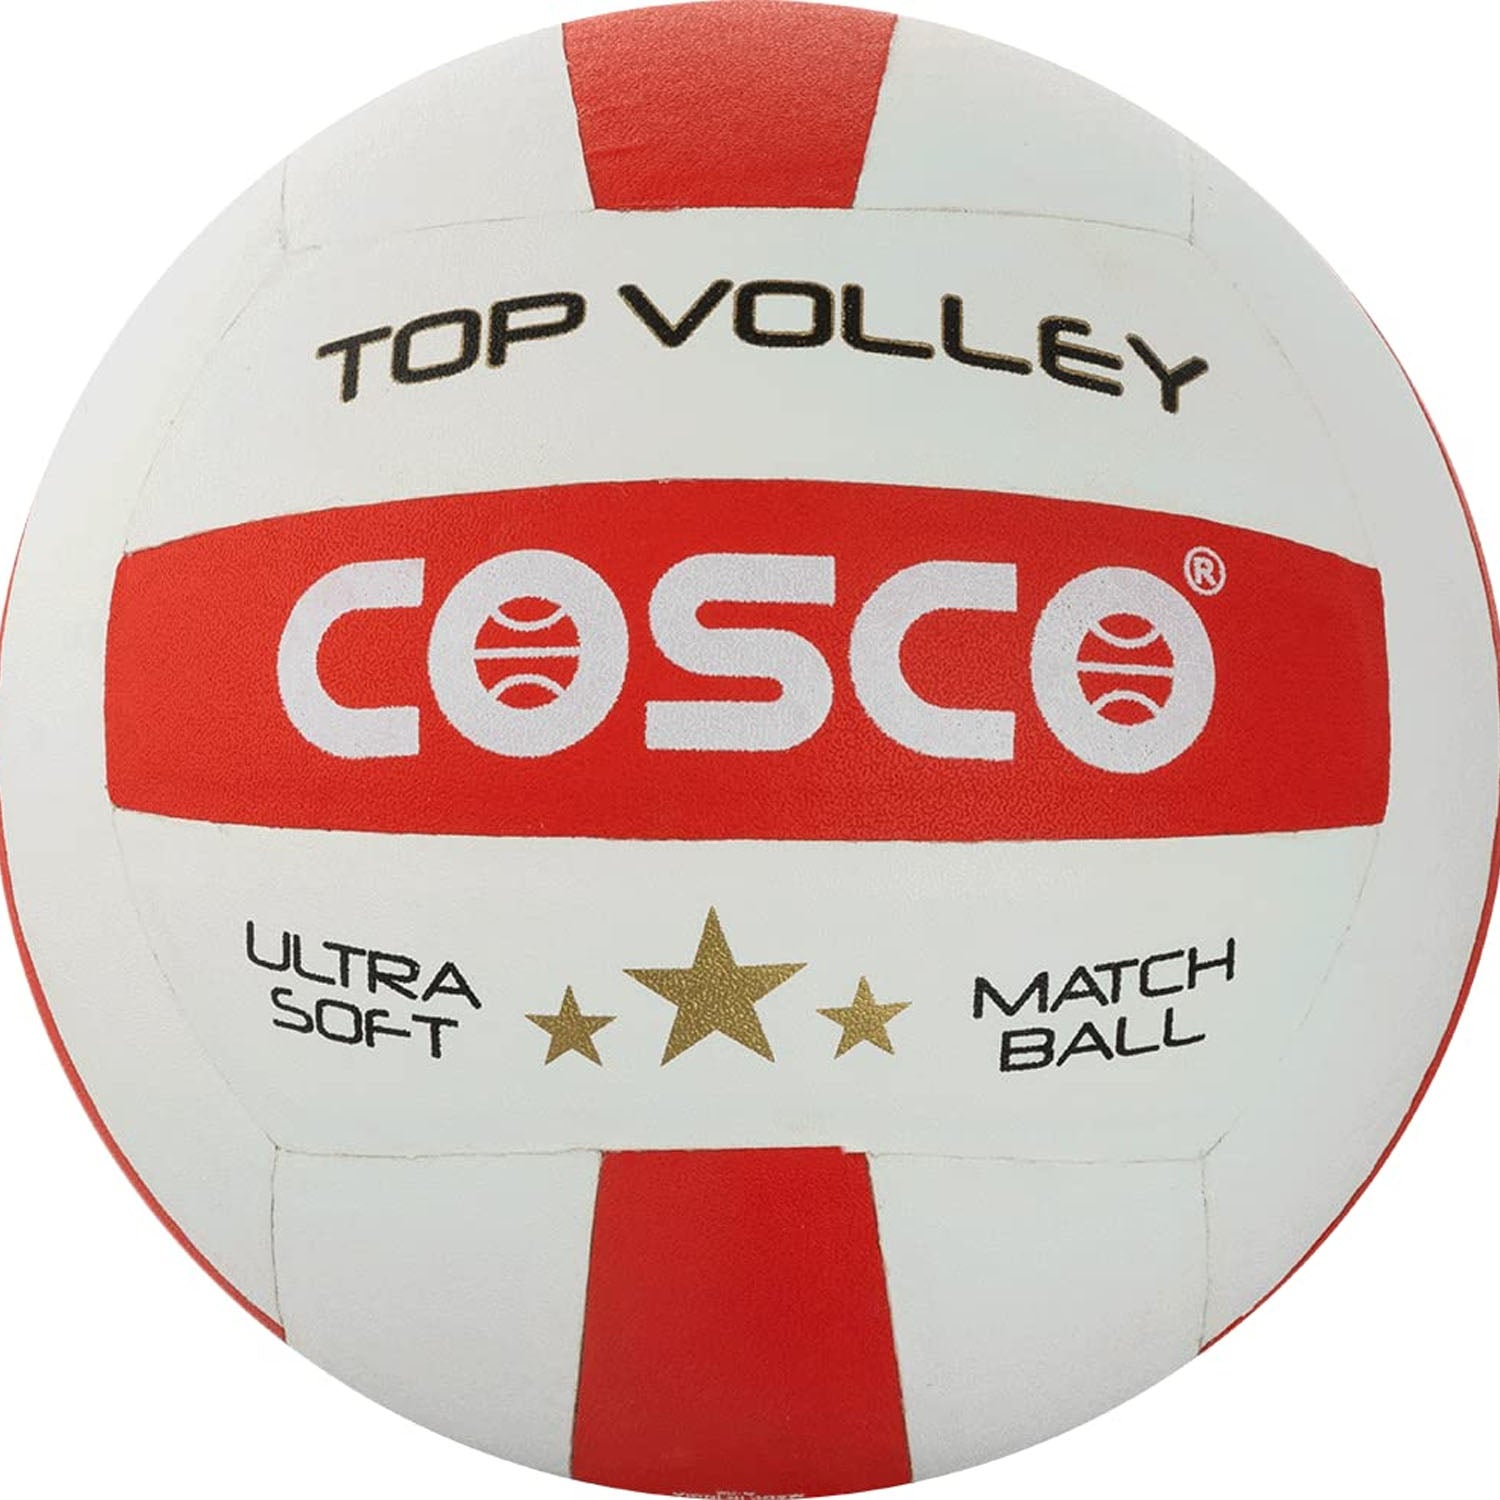 Cosco Top Volley Volleyball, White/Red -Size 4 - Best Price online Prokicksports.com